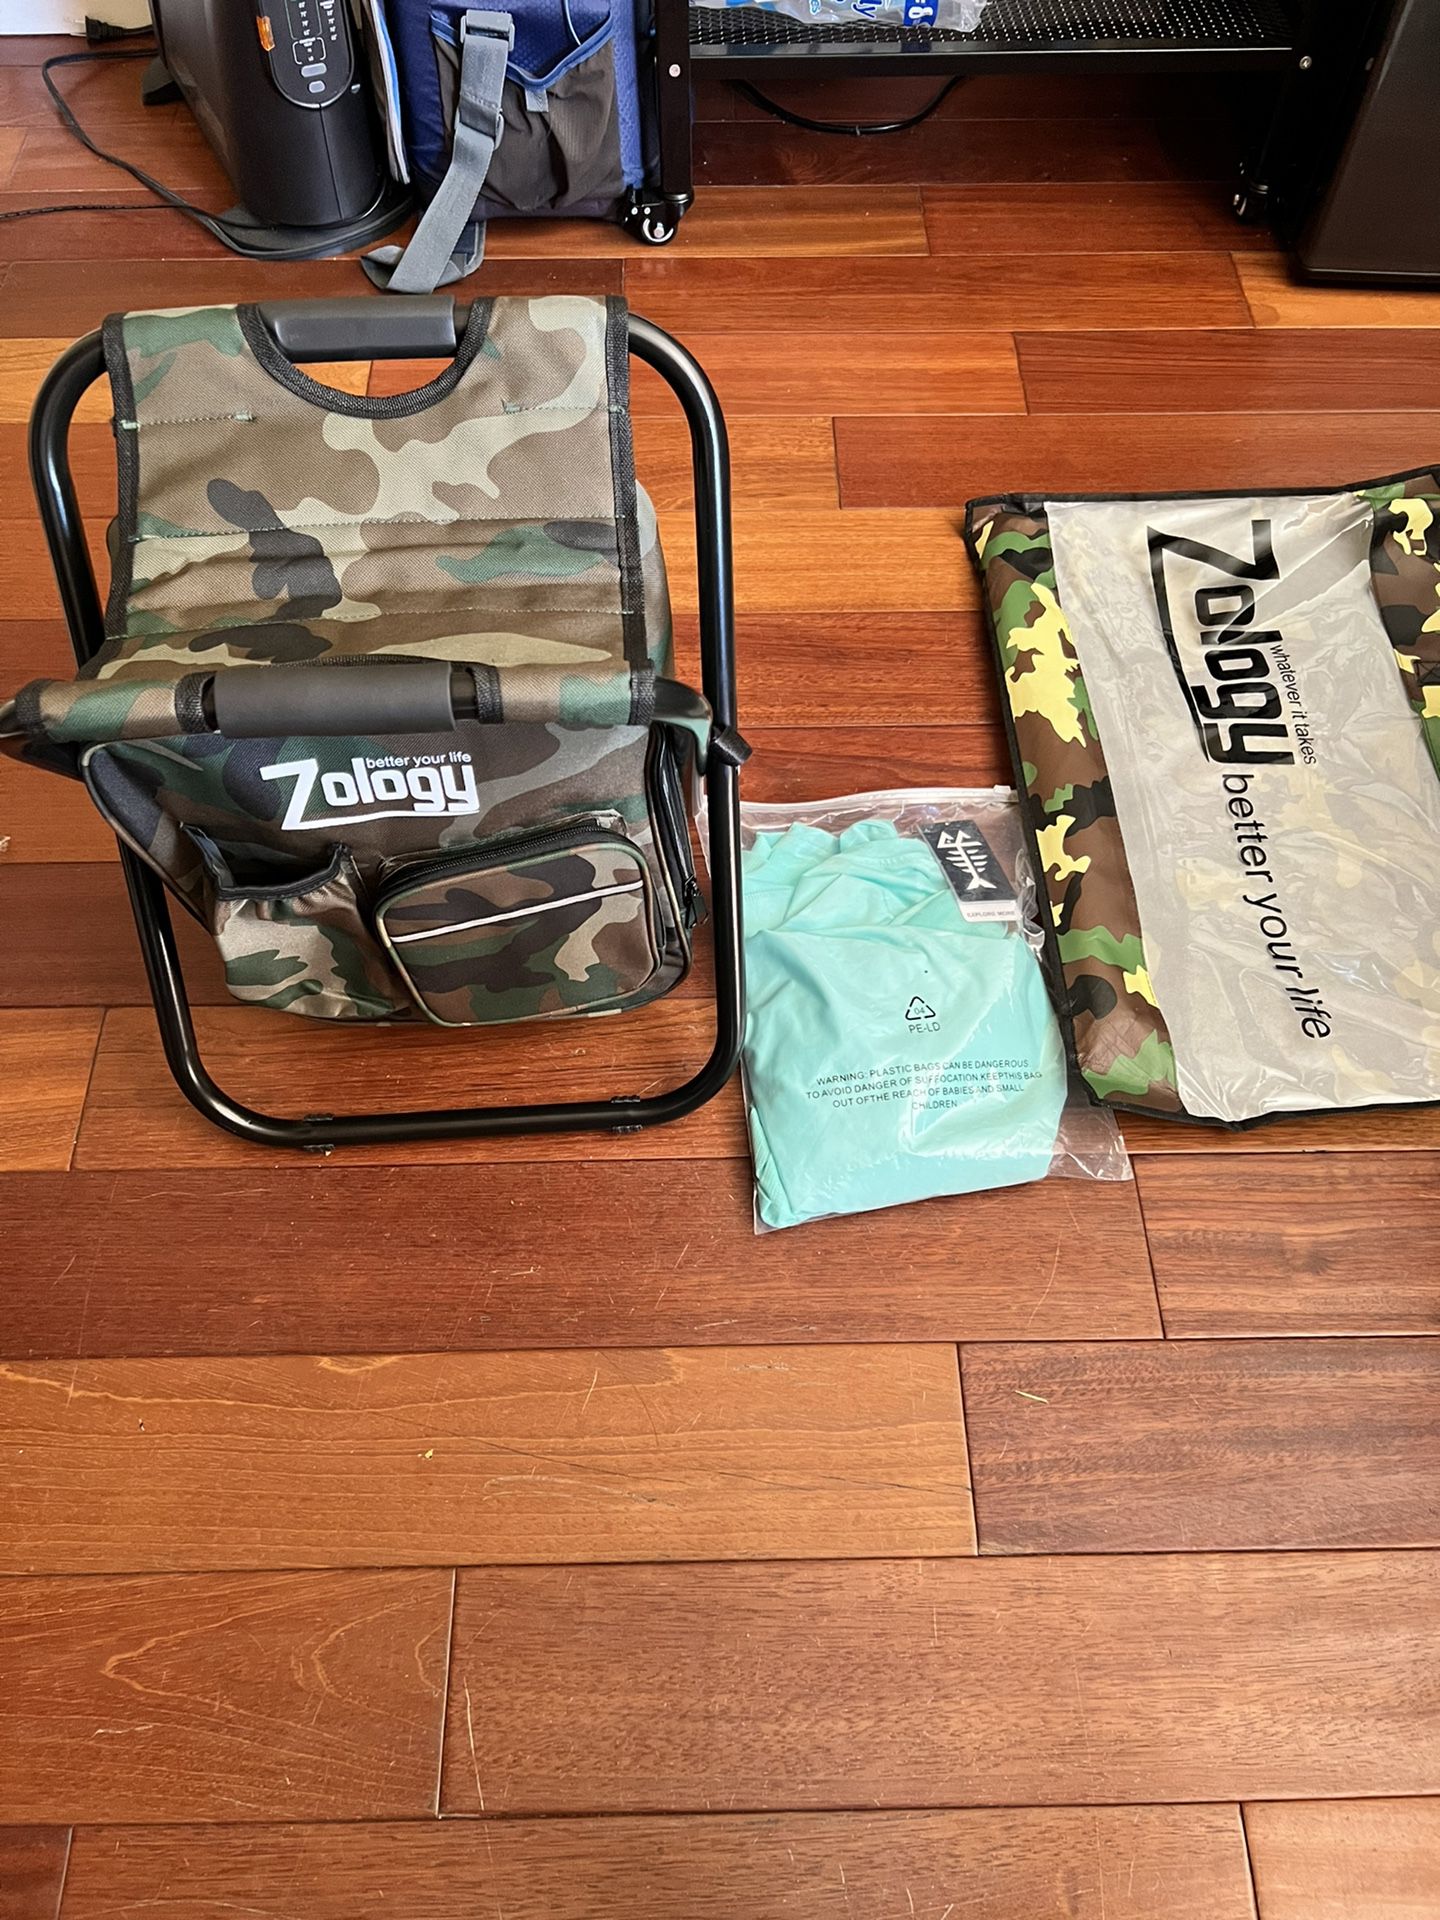 Zology Fishing Bag/chair. With XL fishing Shirt for Sale in Orange